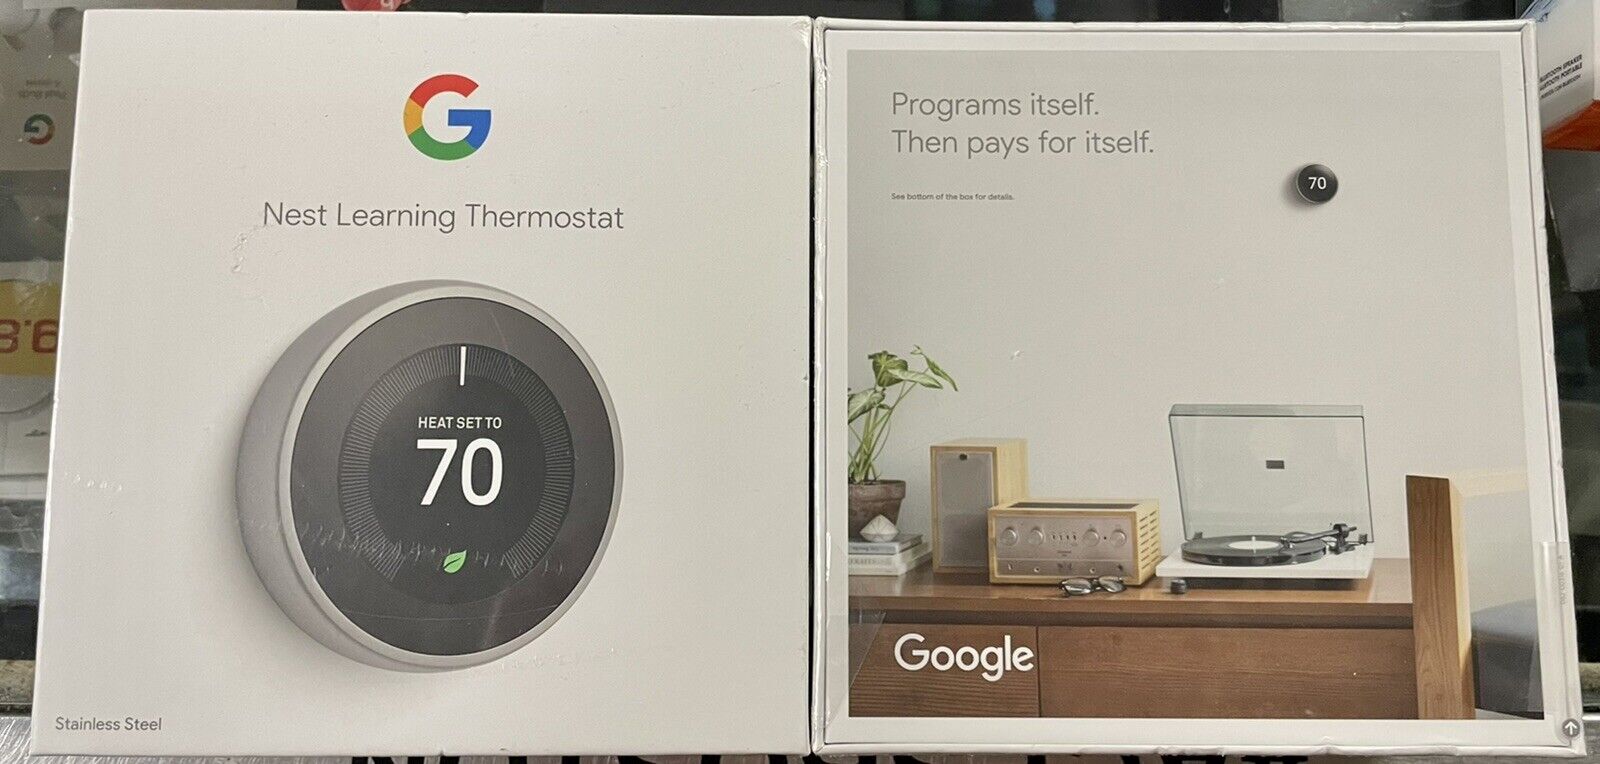 Google Brand New  Nest 3rd Gen. Learning Thermostat - Stainless Steel Sealed